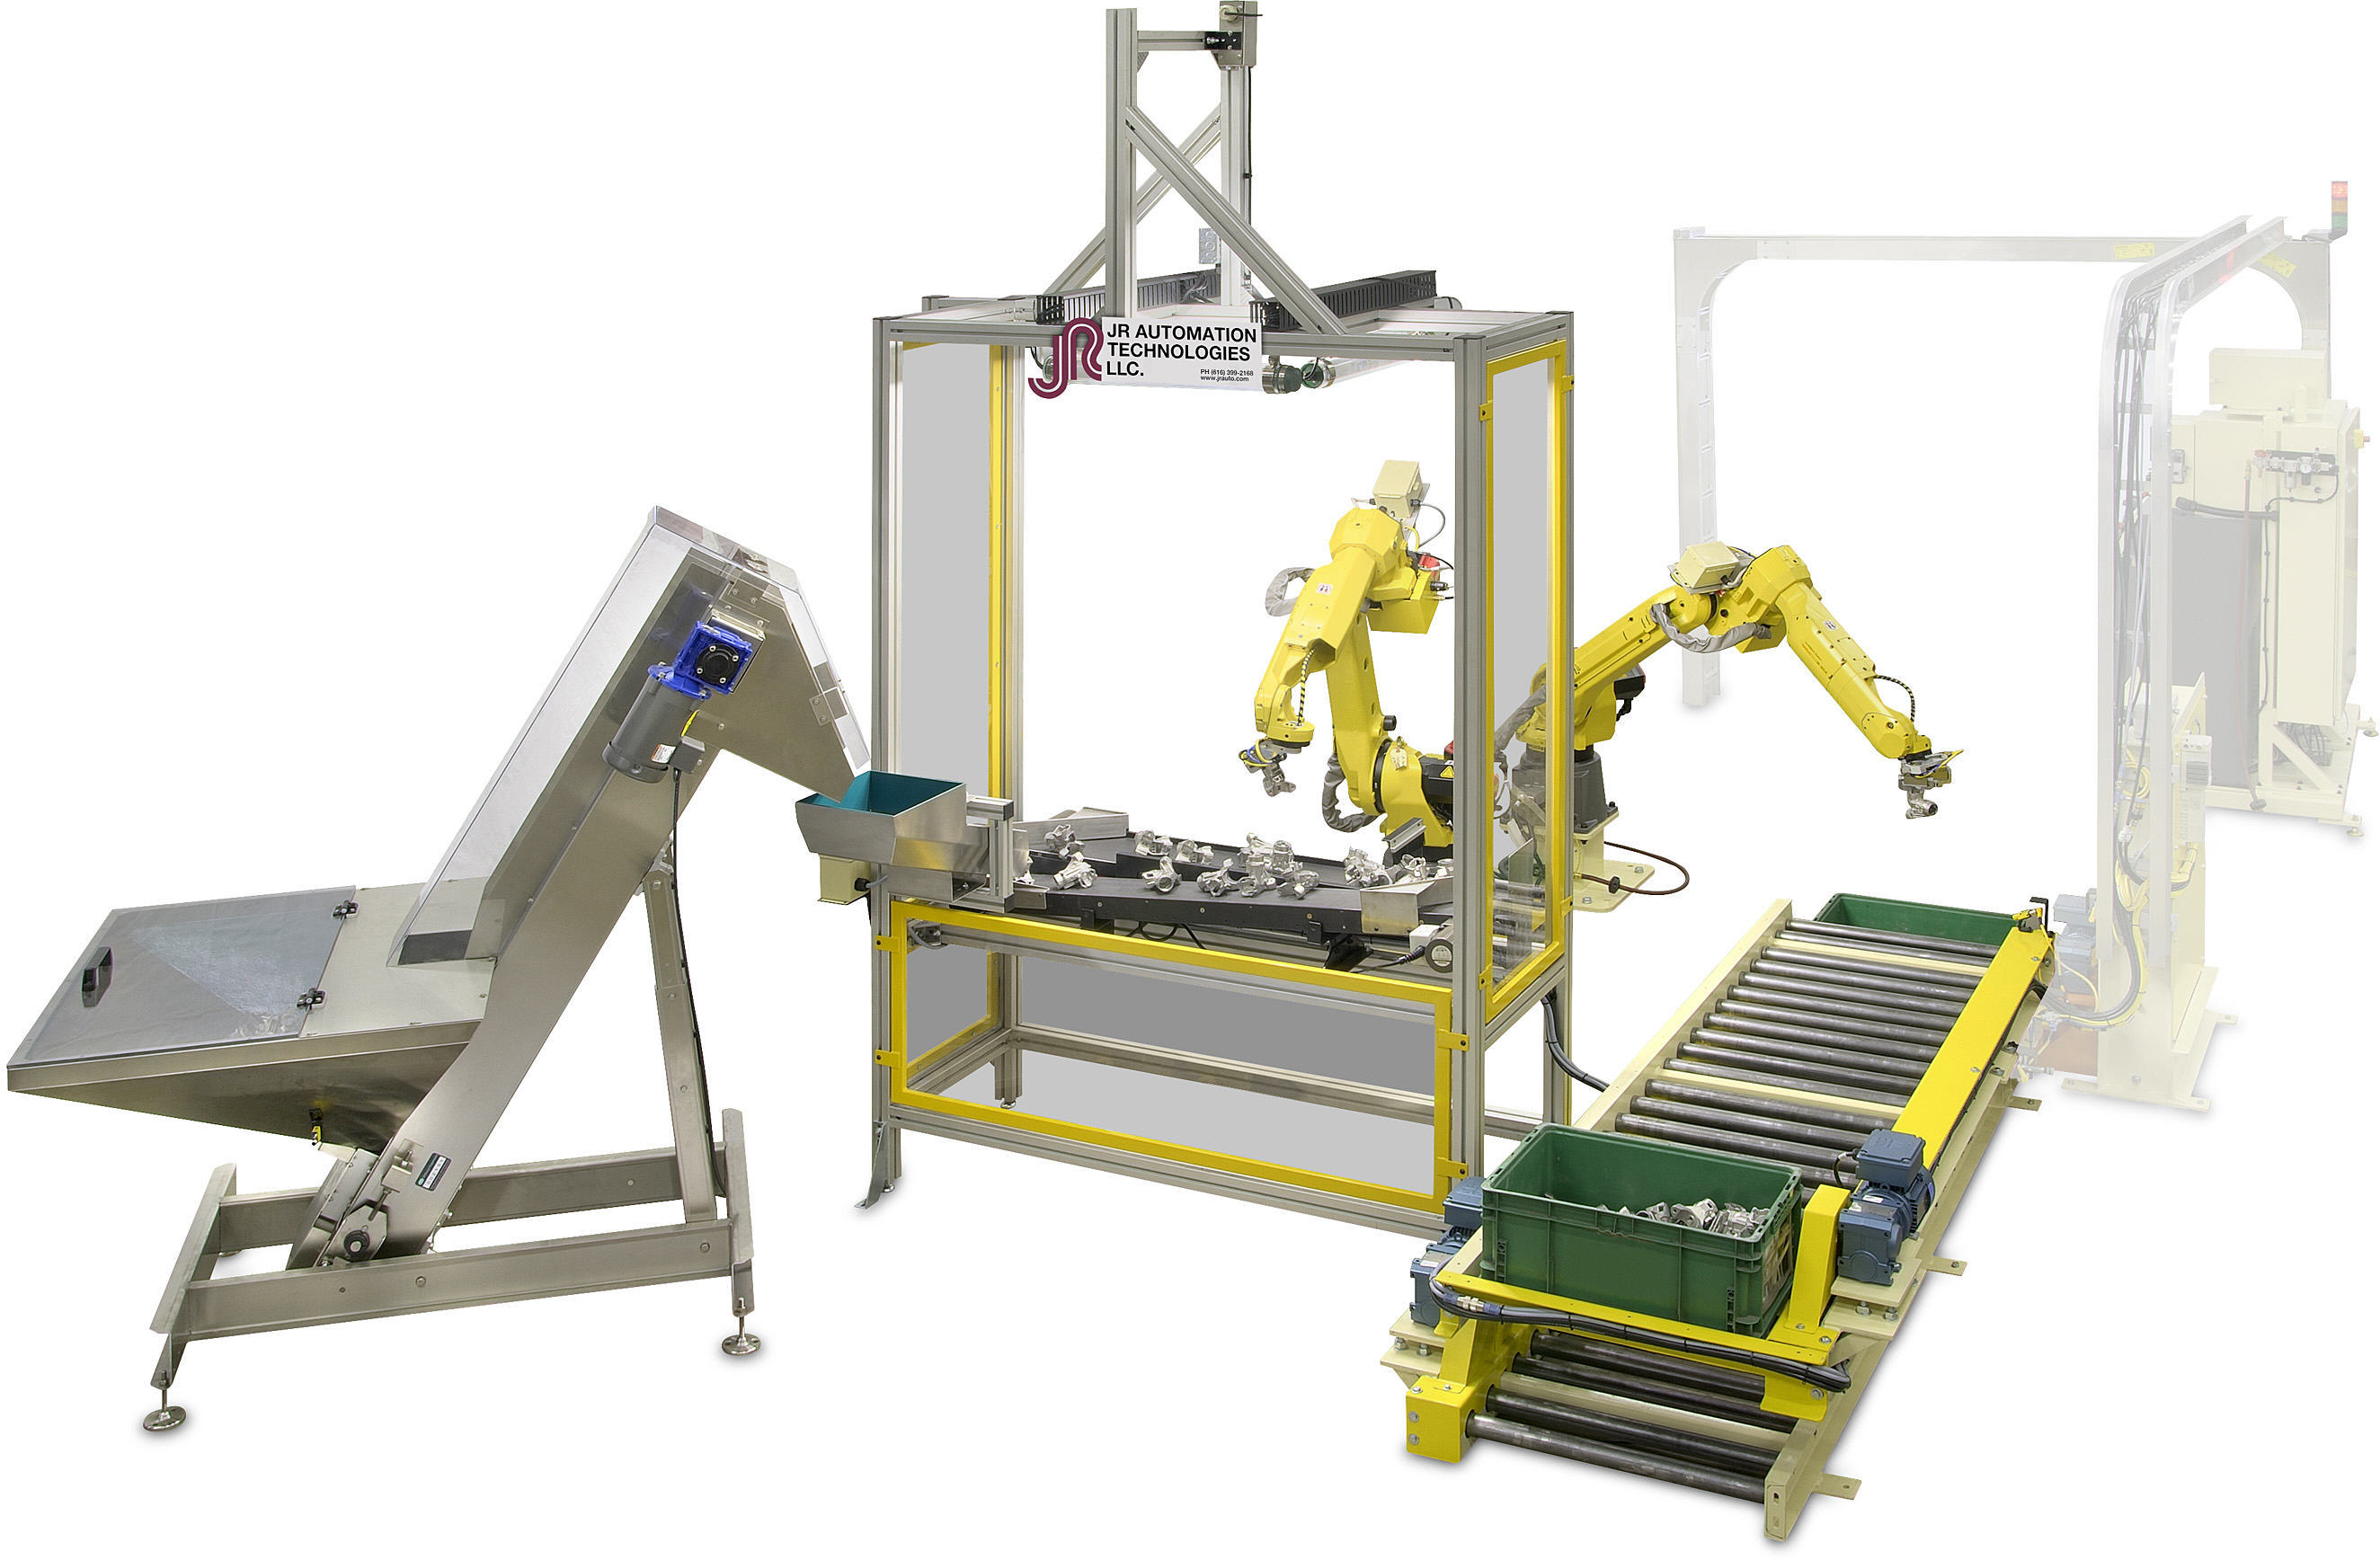 Vision Guided Robotic Flexible Feeding allows for almost endless product line configurations, eliminating the need for part designated infeed systems and machines.